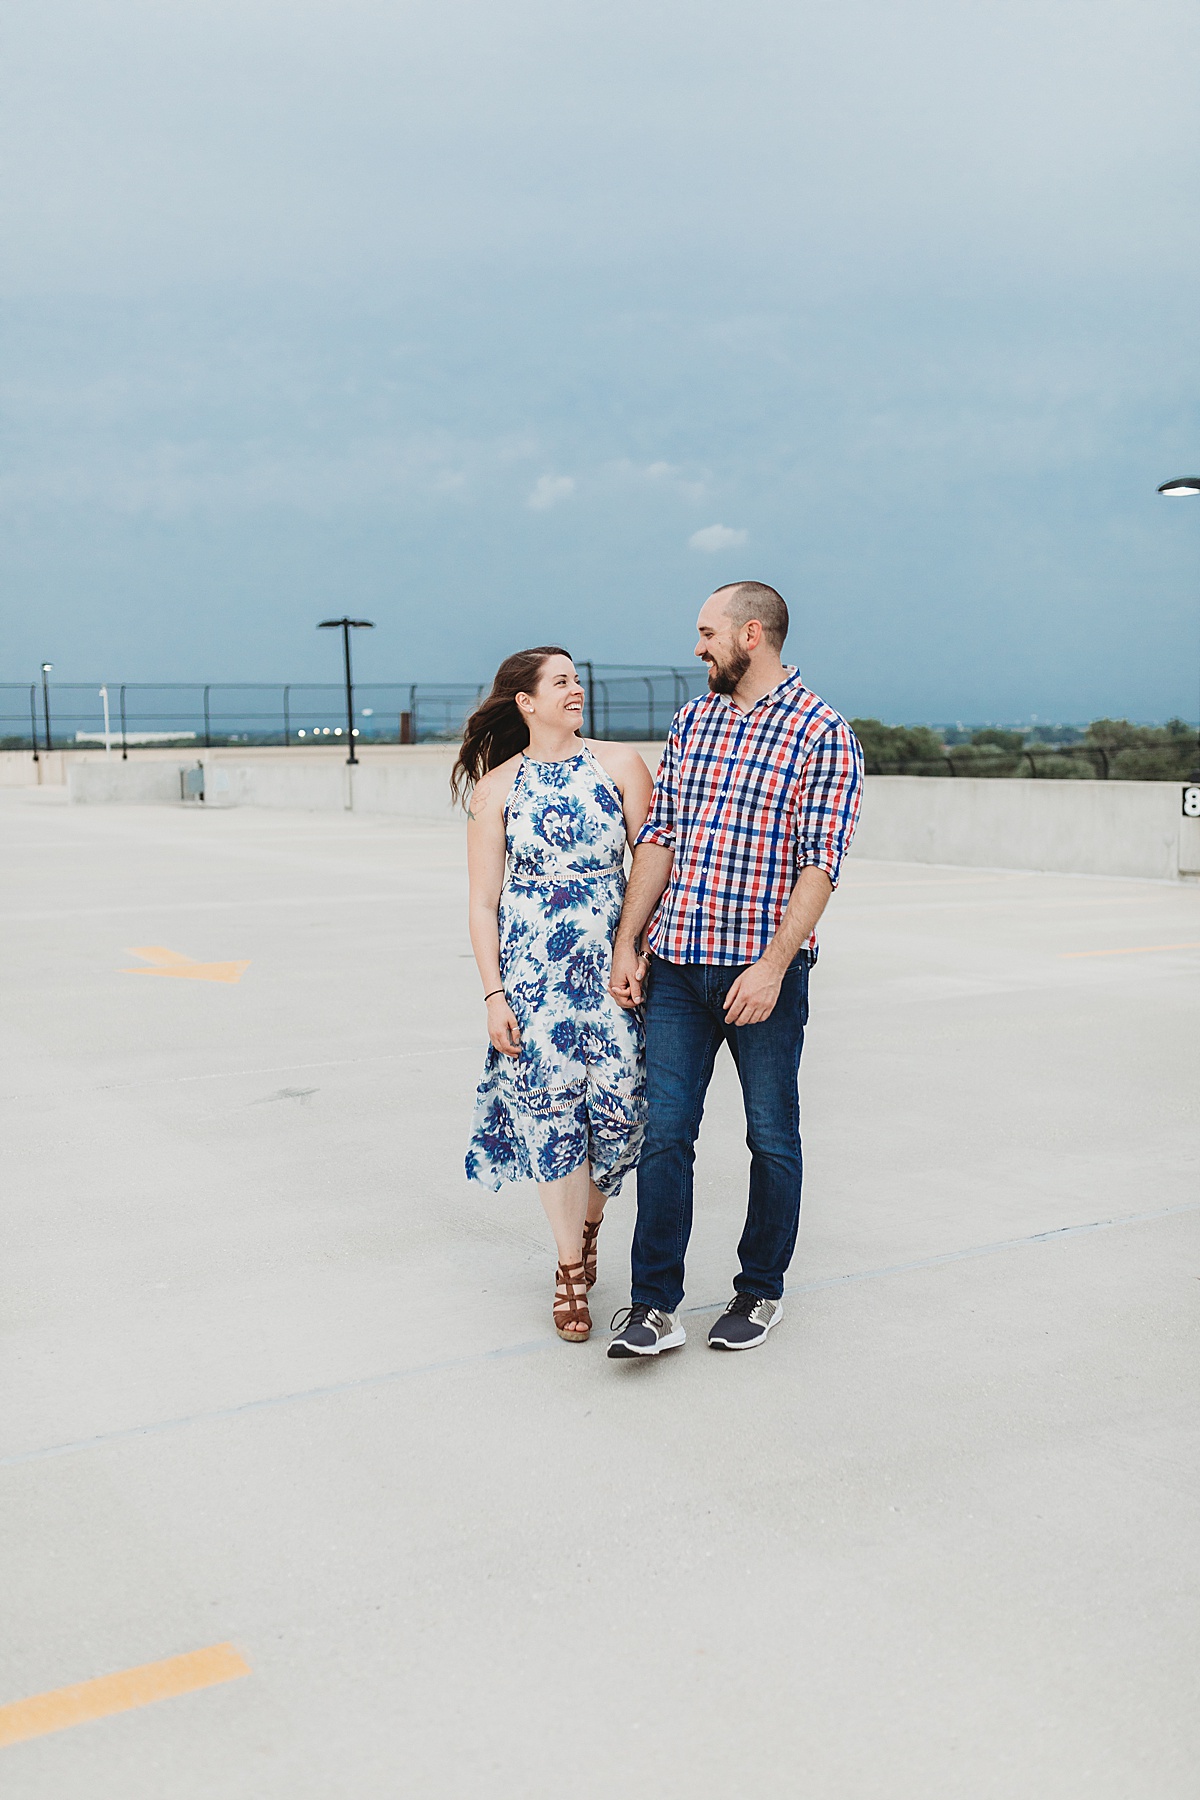 Downtown Neenah engagement photography